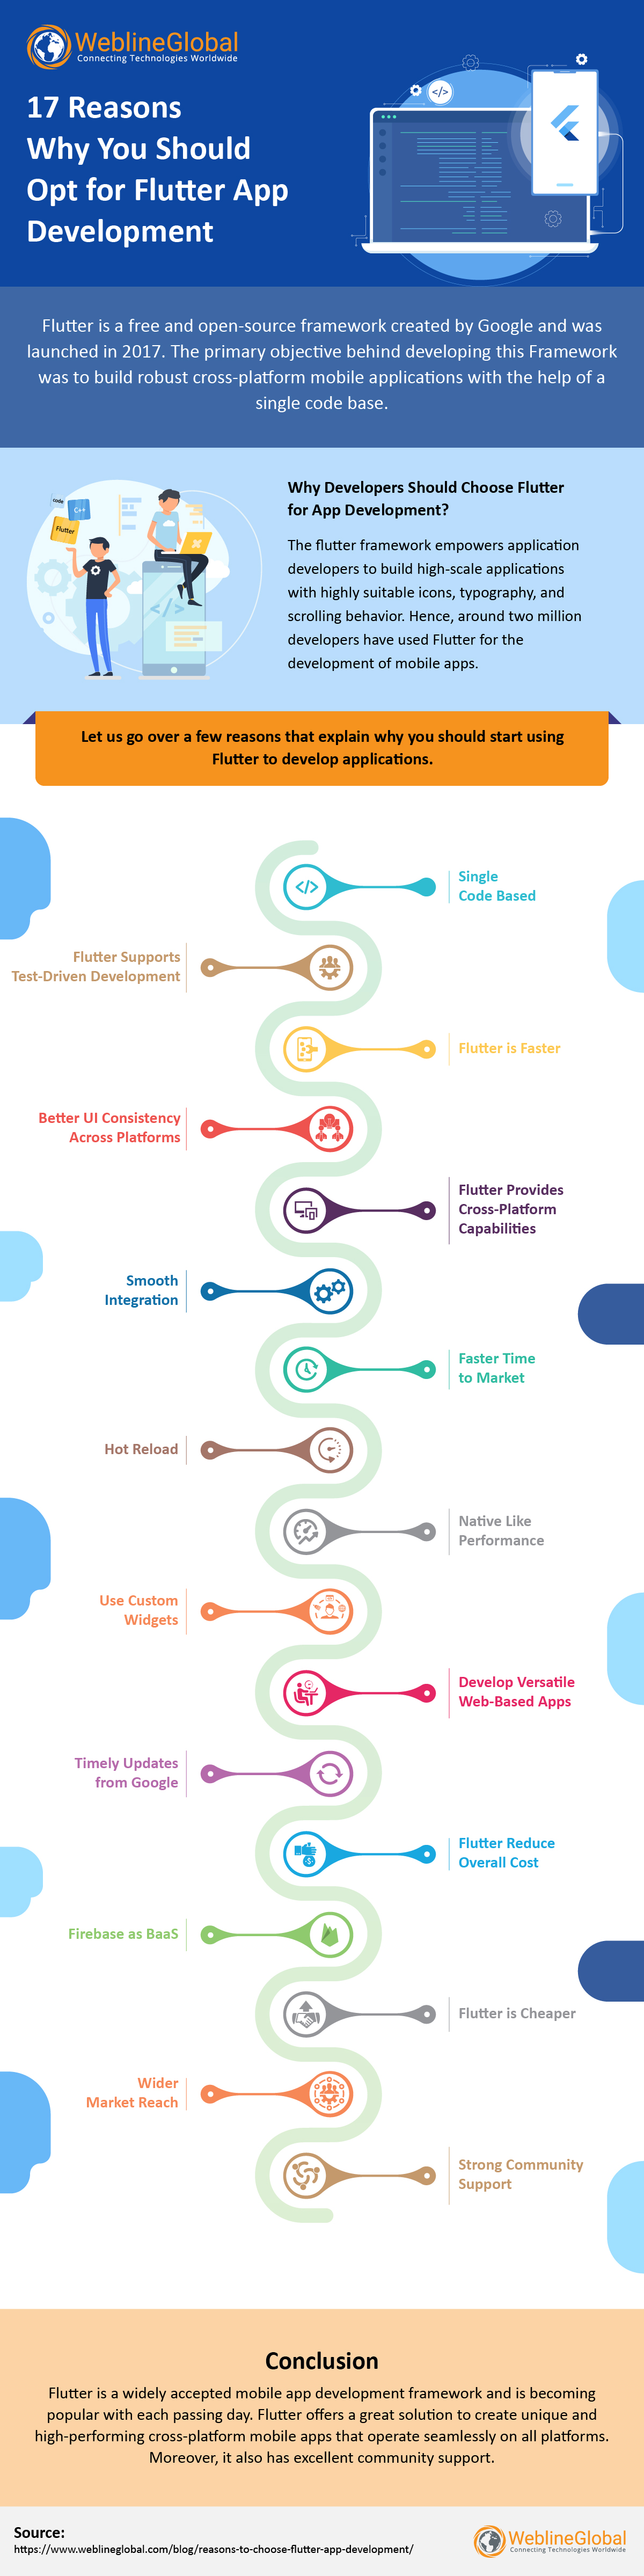 Top Reasons to Choose Flutter for Mobile App Development Infographic